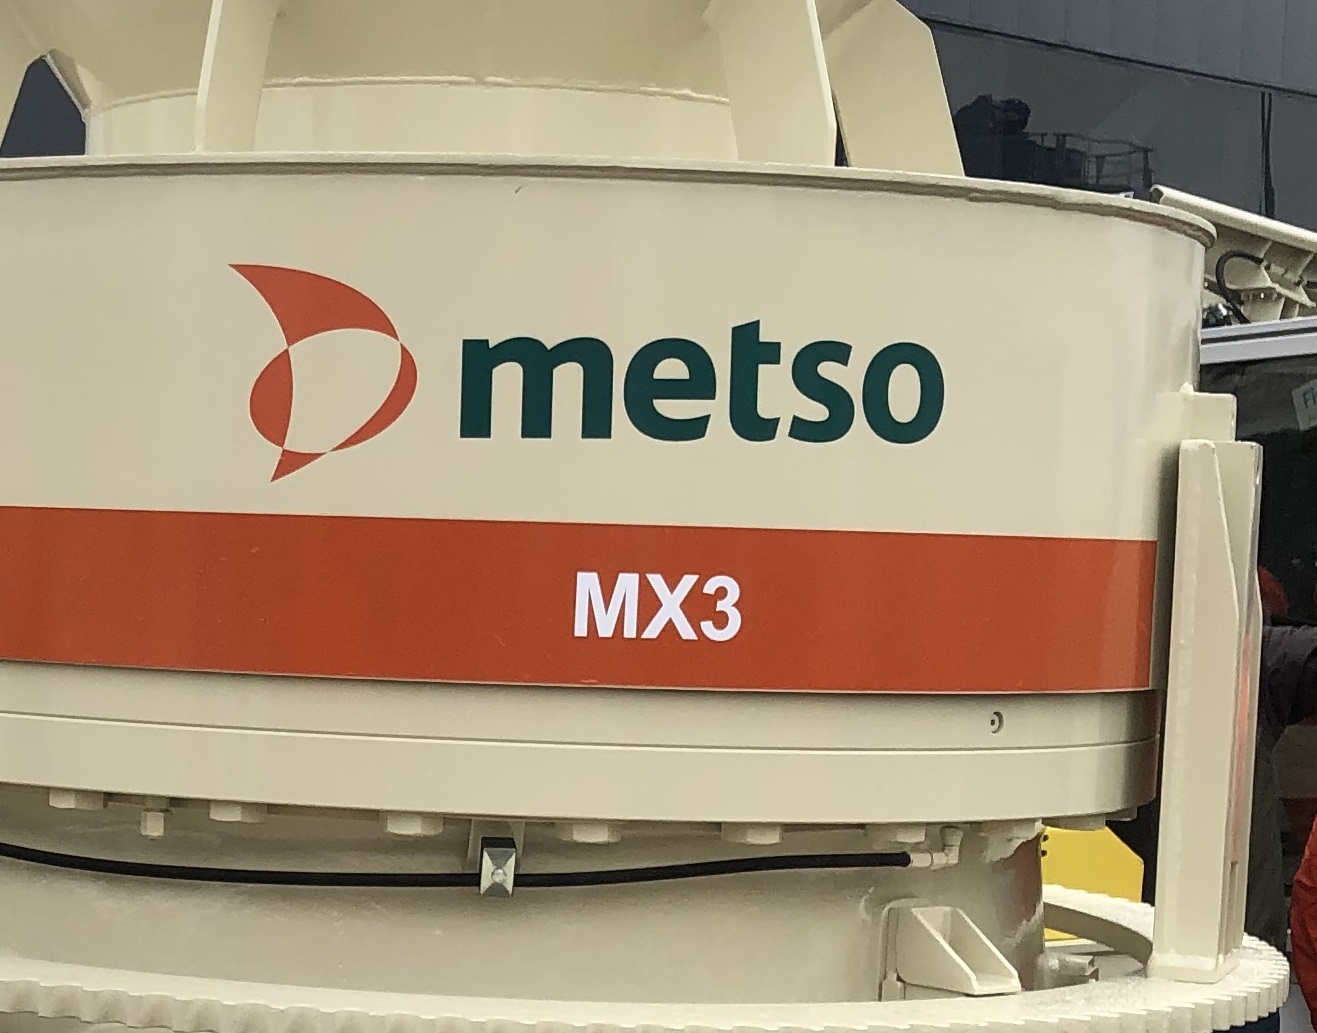  Metso Outotec says the agreement with NIB is an industry-leading example of sustainable financing